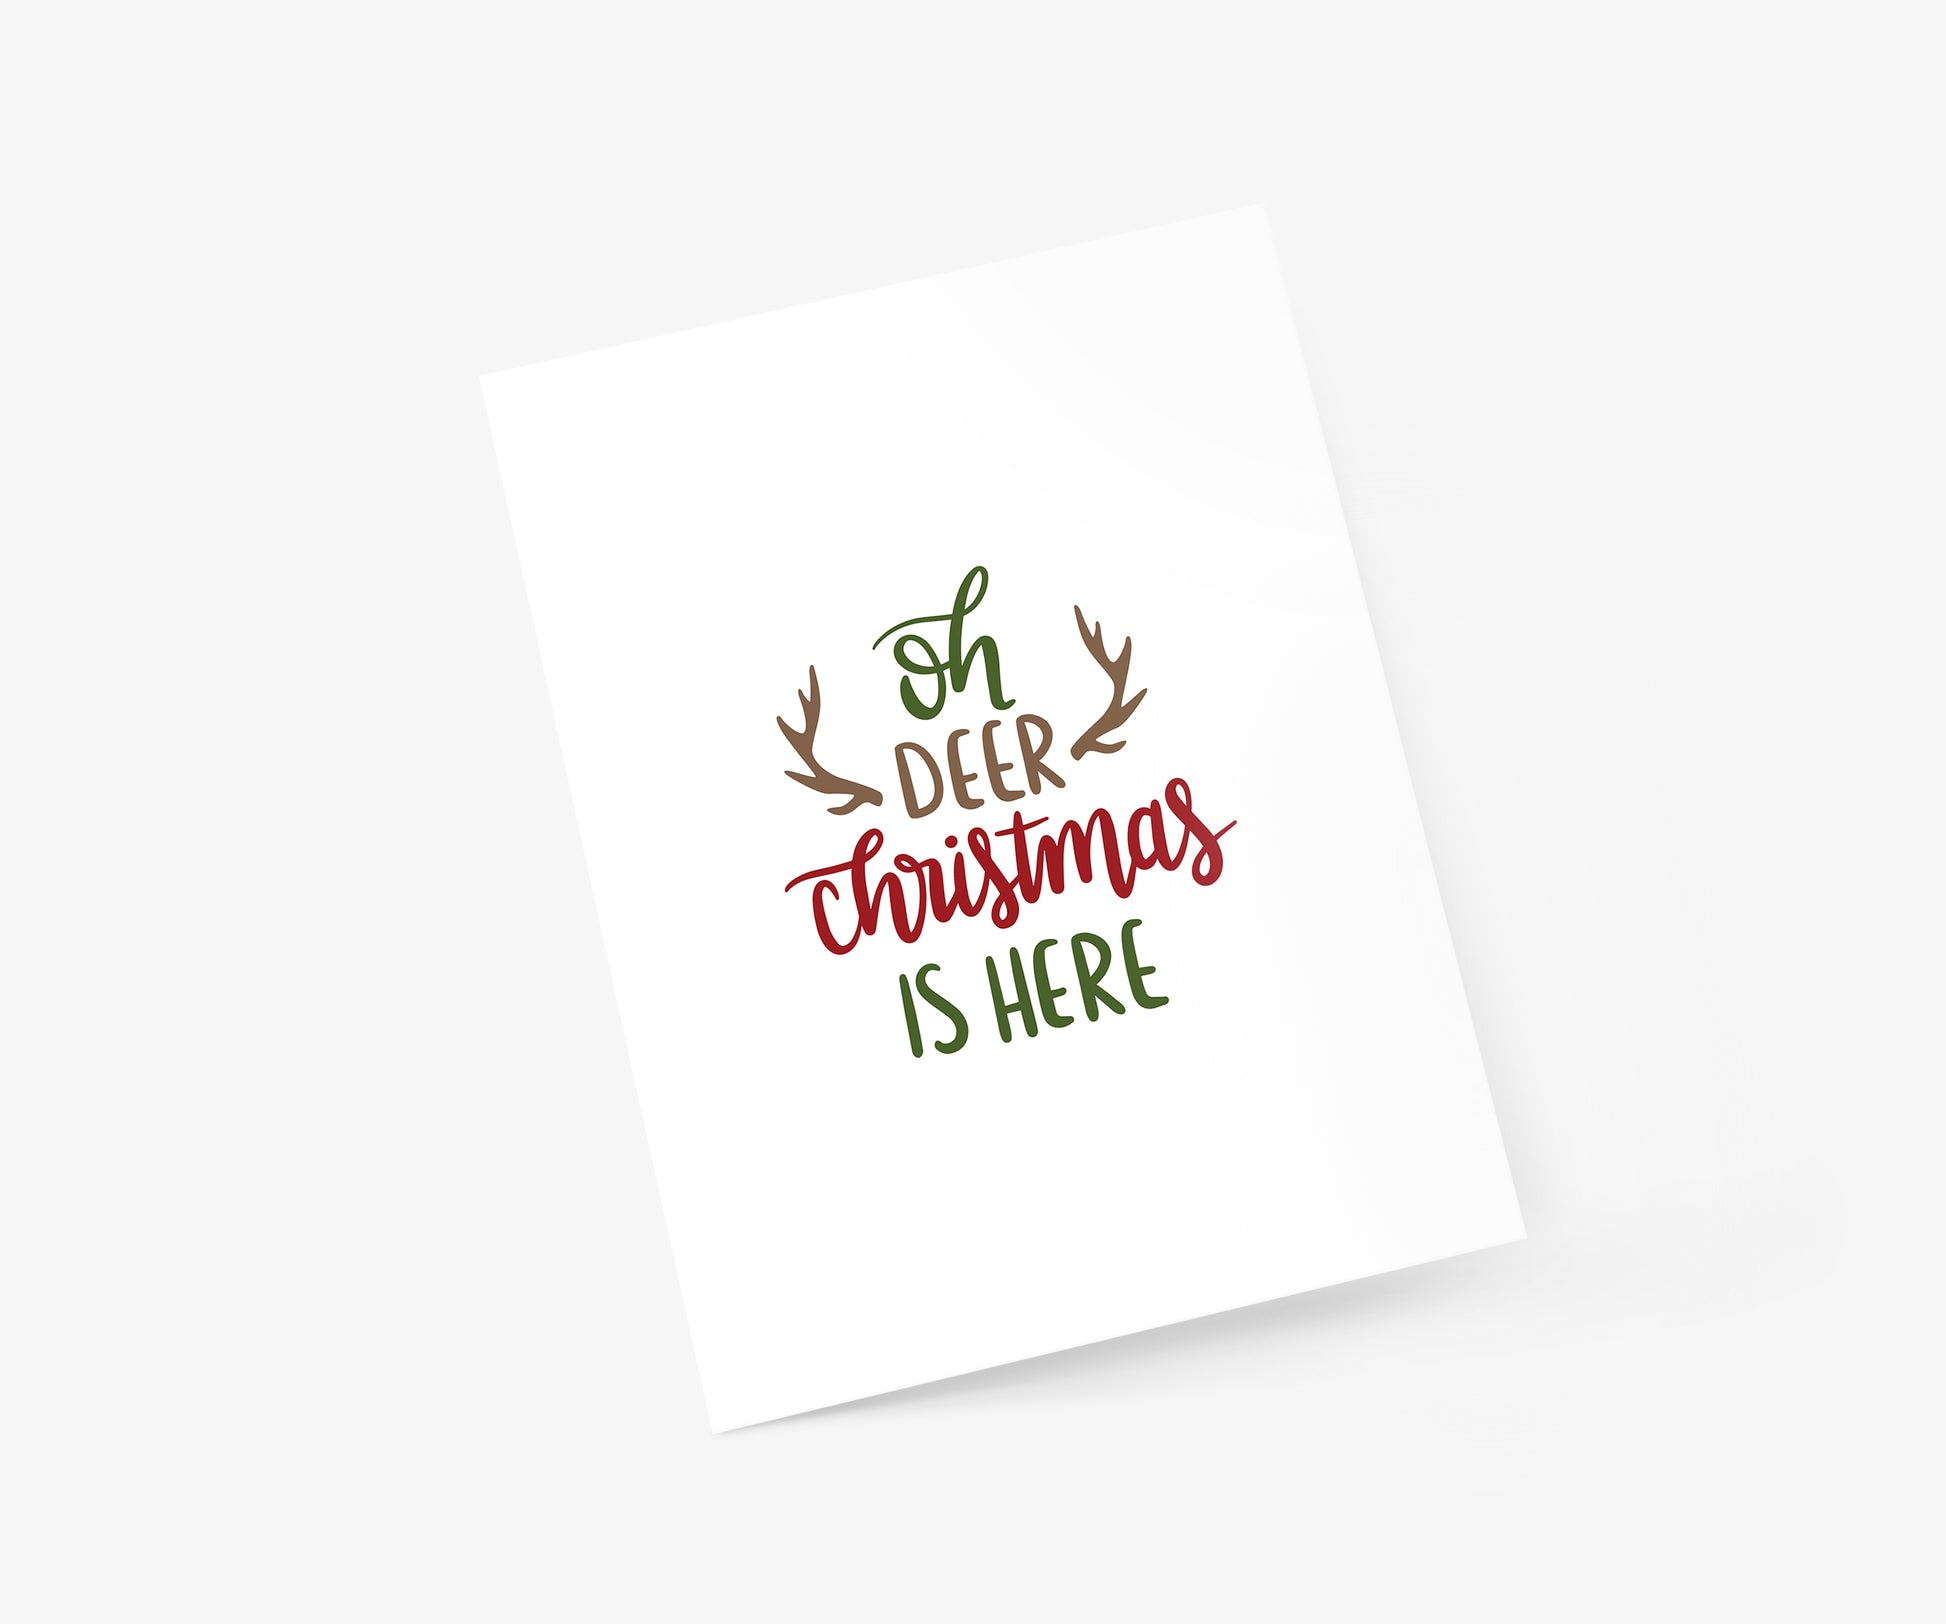 Oh Deer Christmas Is Here Christmas Card | Footnotes Paper